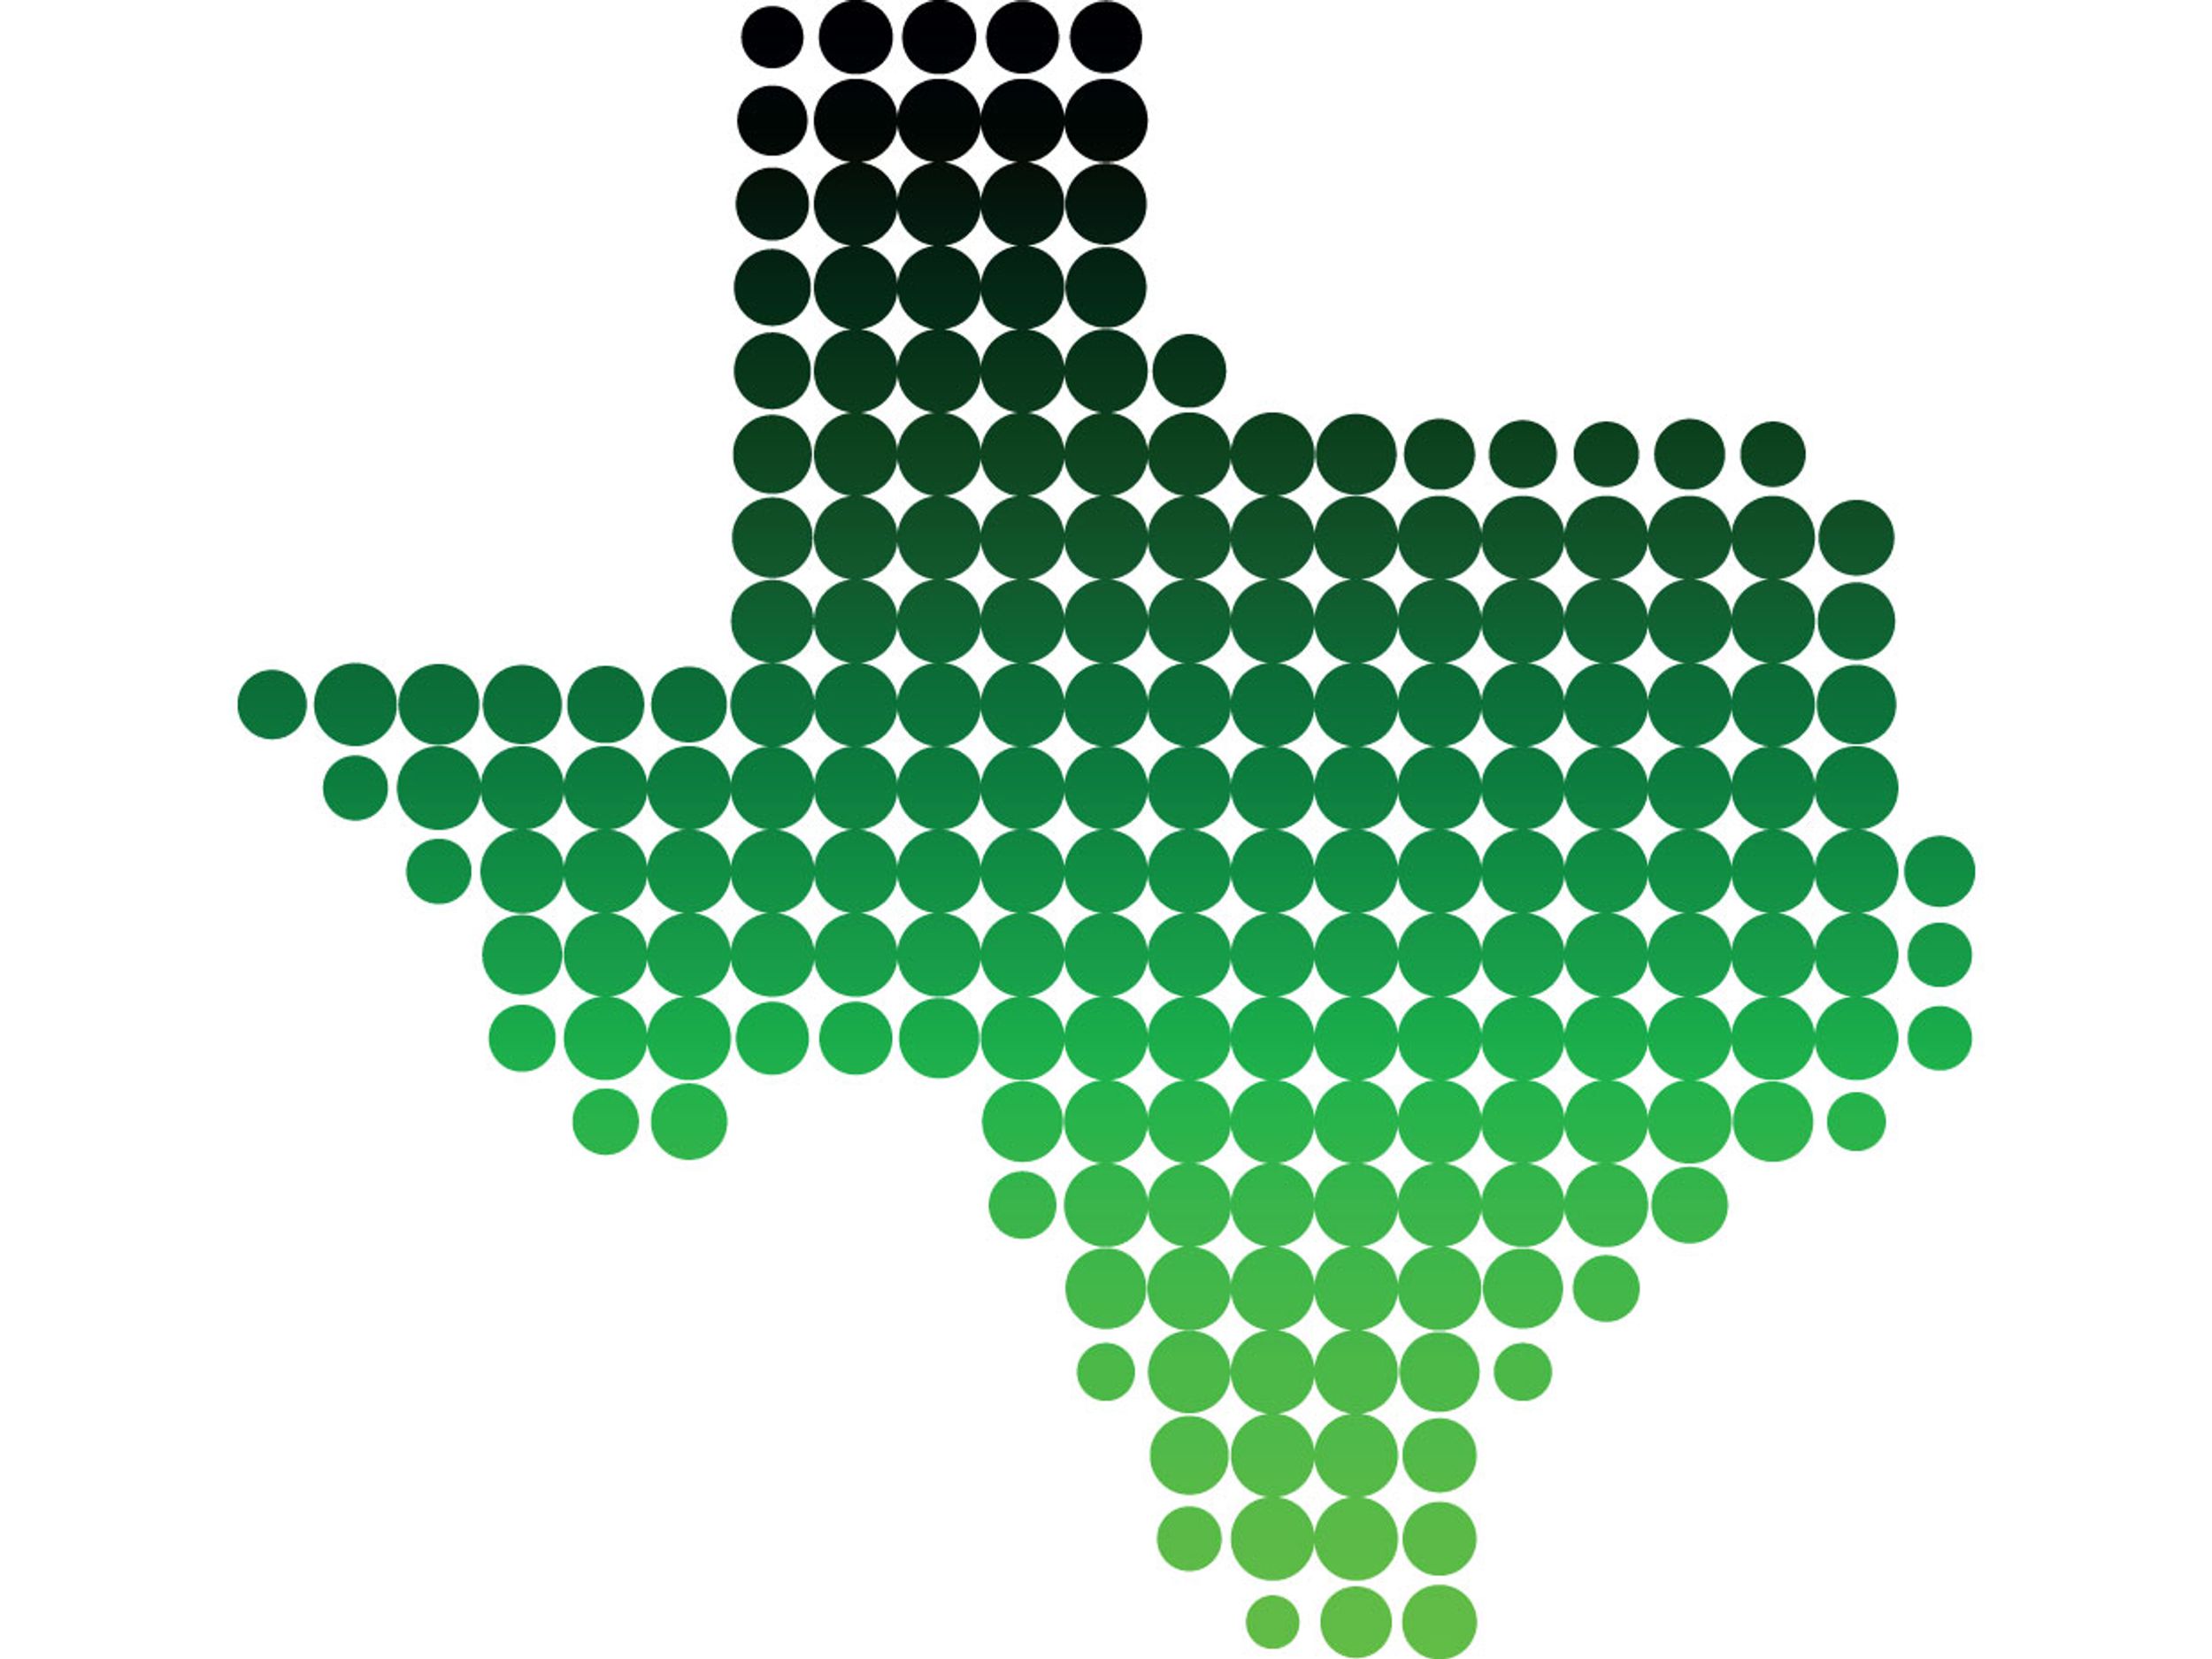 Image of the state of Texas made of different shades of green circles.